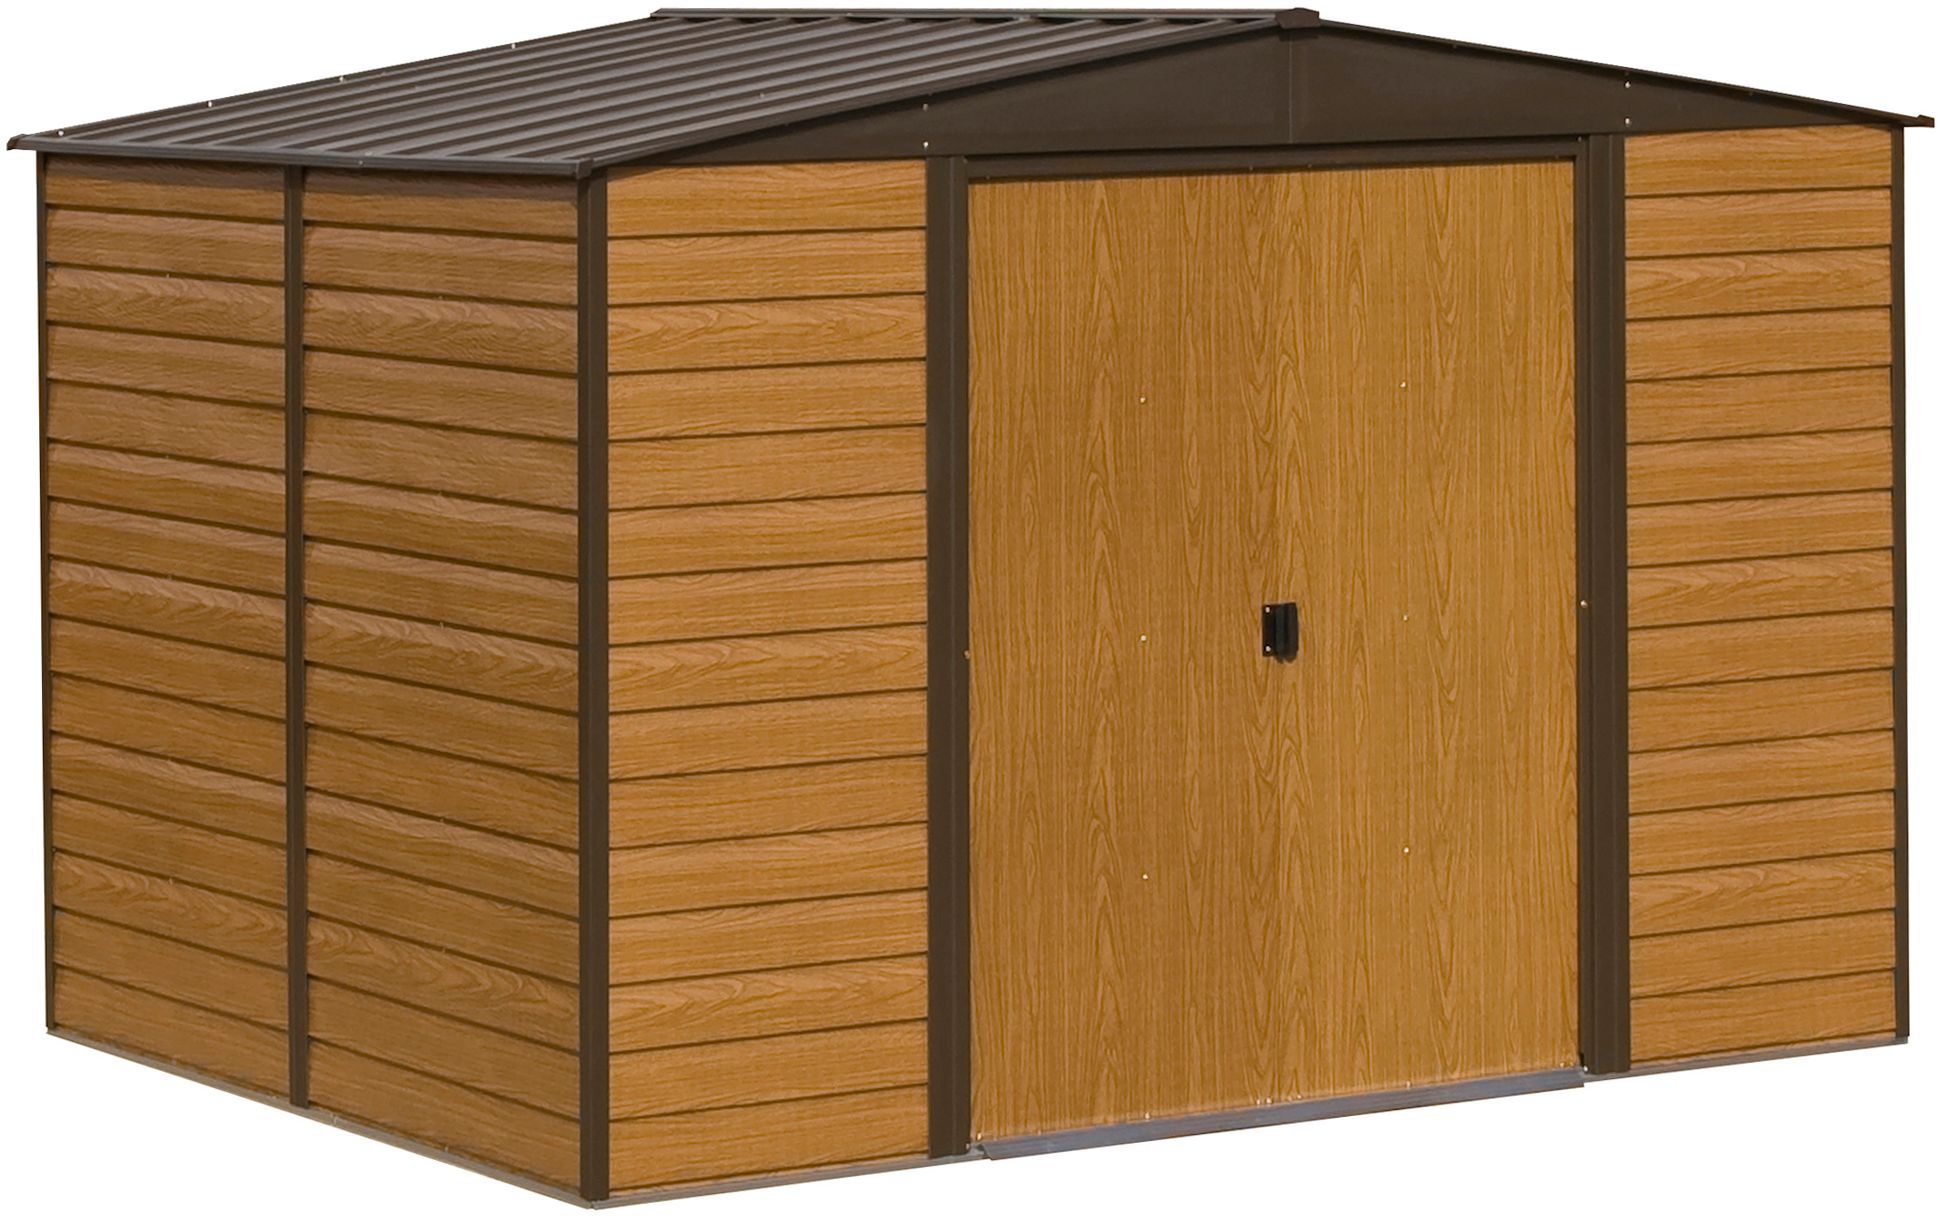 Arrow Woodvale 10x6 Apex Metal Shed - Assembly service included